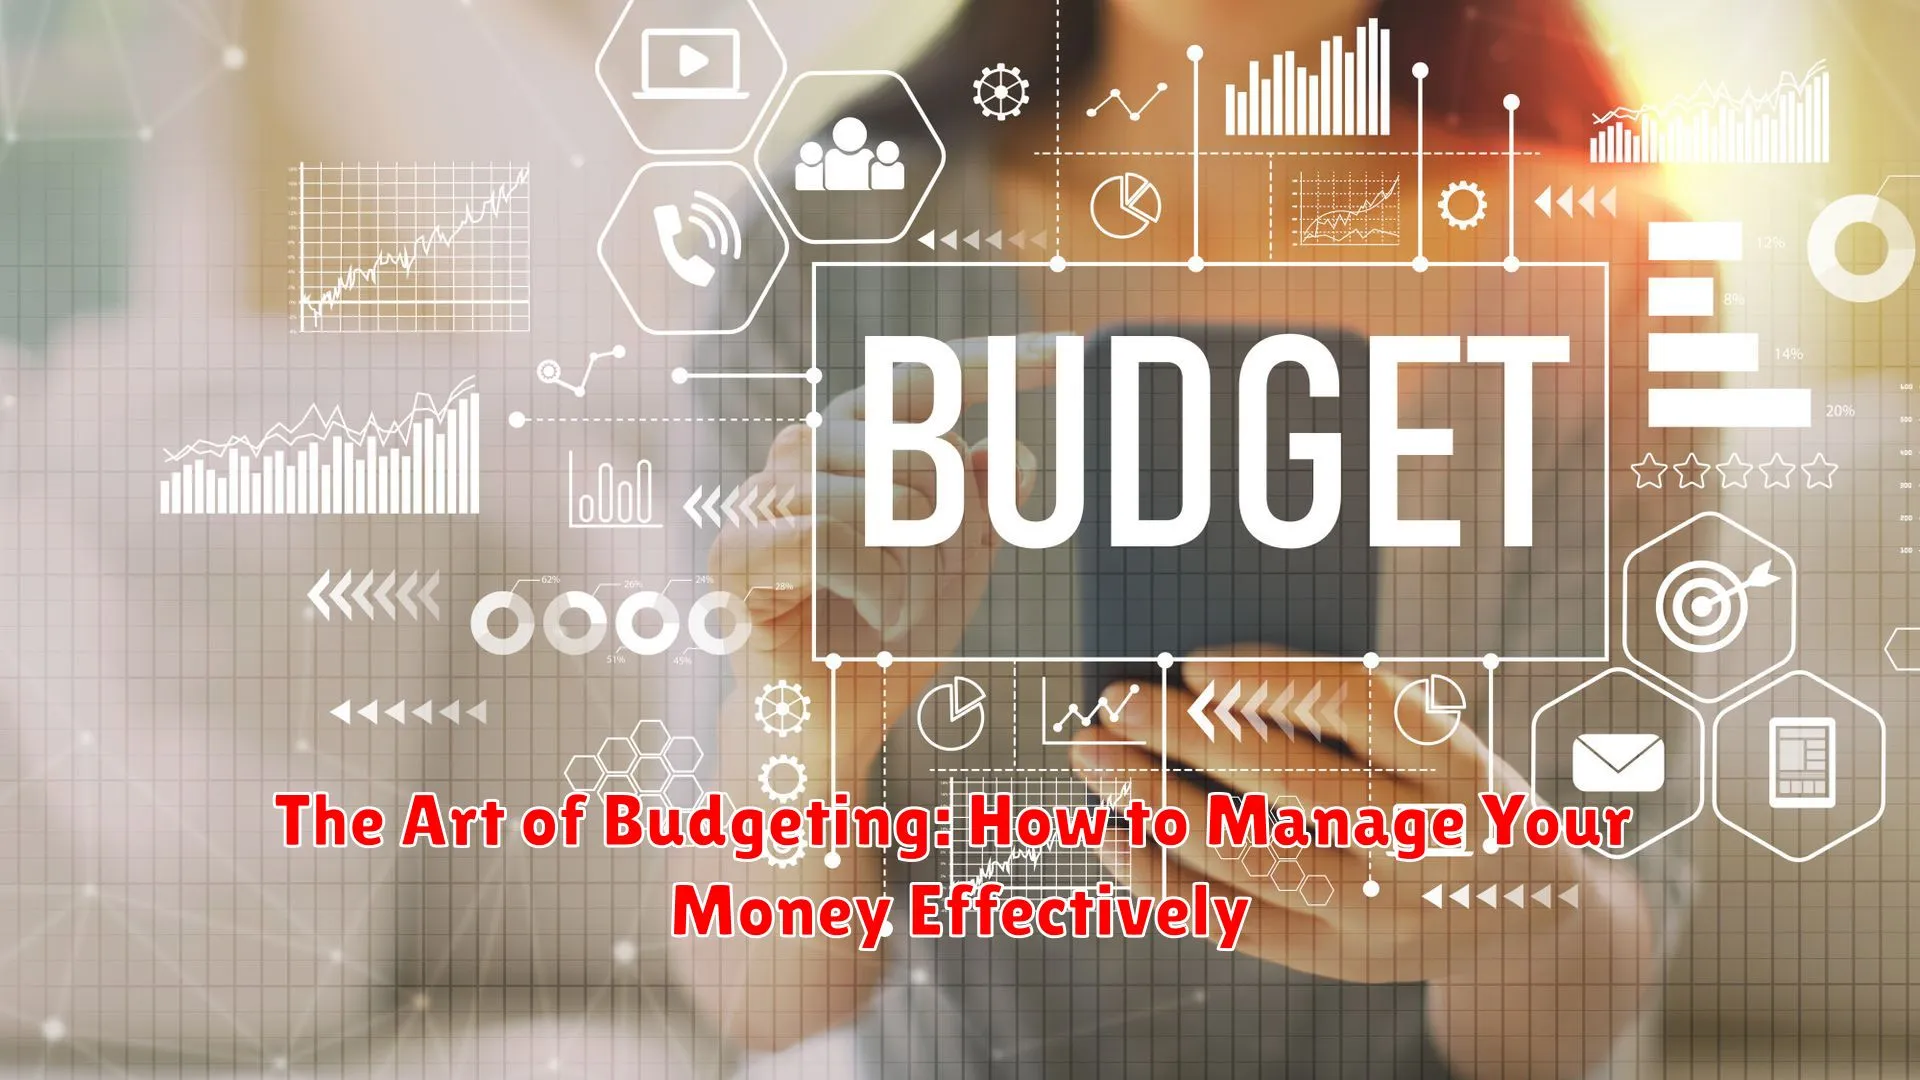 The Art of Budgeting: How to Manage Your Money Effectively